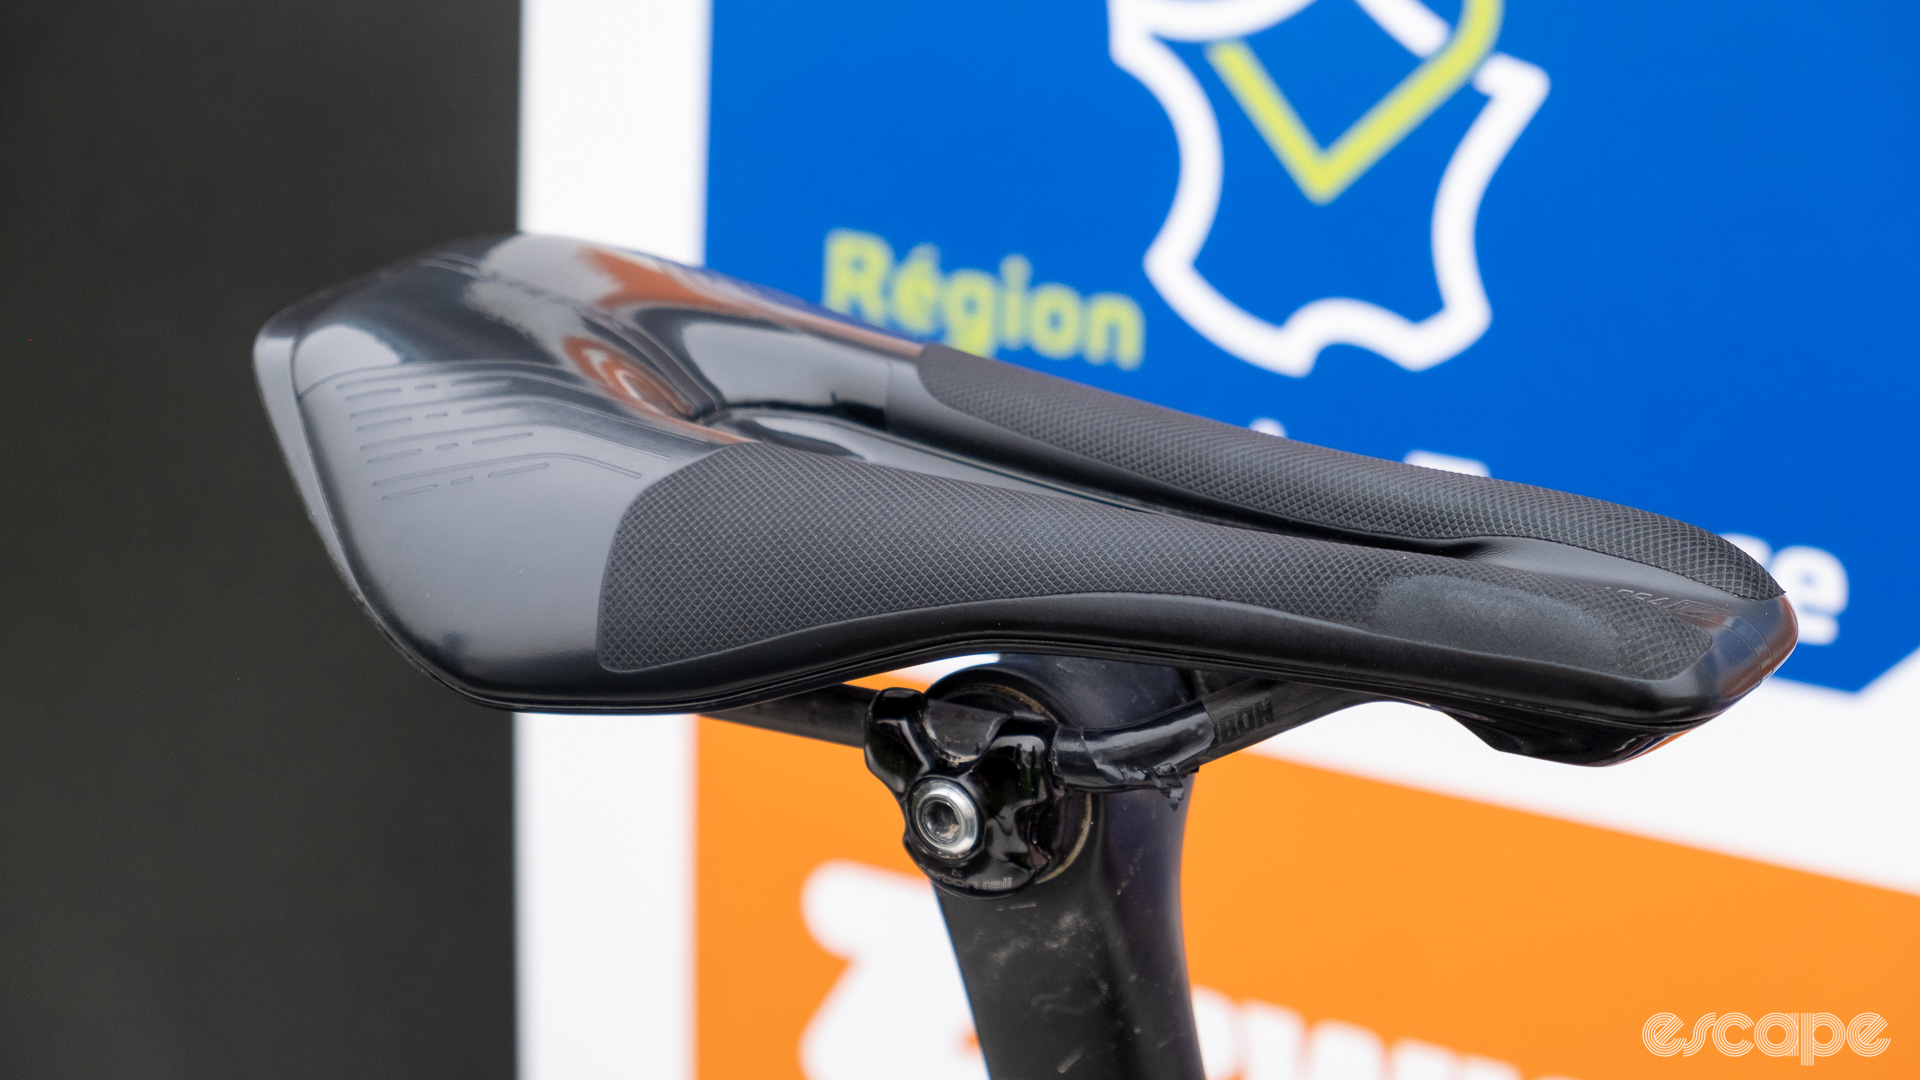 The image shows Lotte Kopecky's saddle